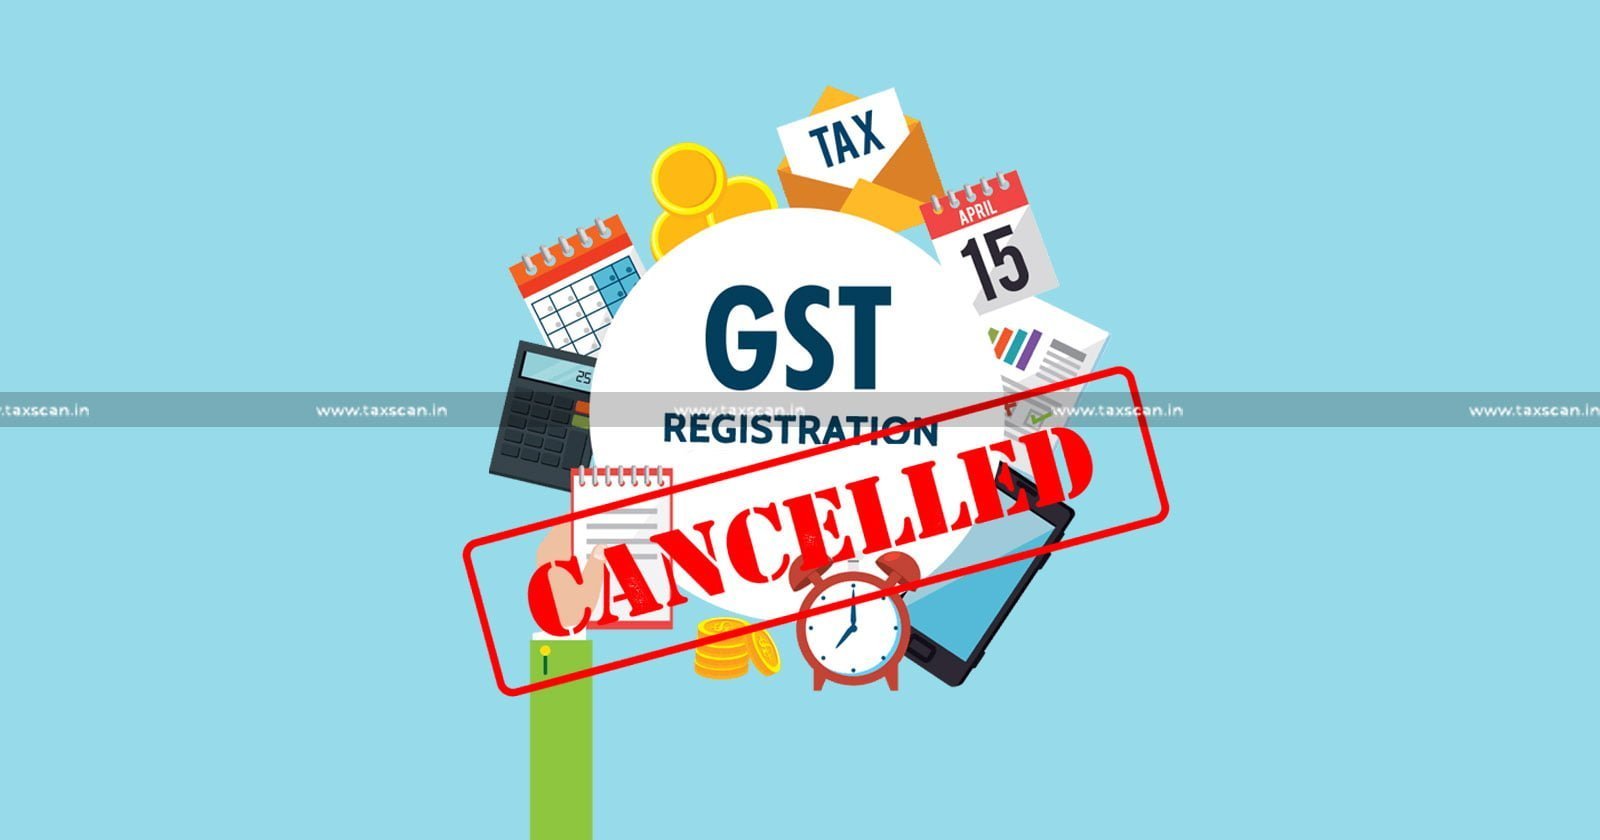 File-Return - GST- Act - Business -Cease - Delh HC Cancellation GSTRegistration Non-Filing Returns-taxscan